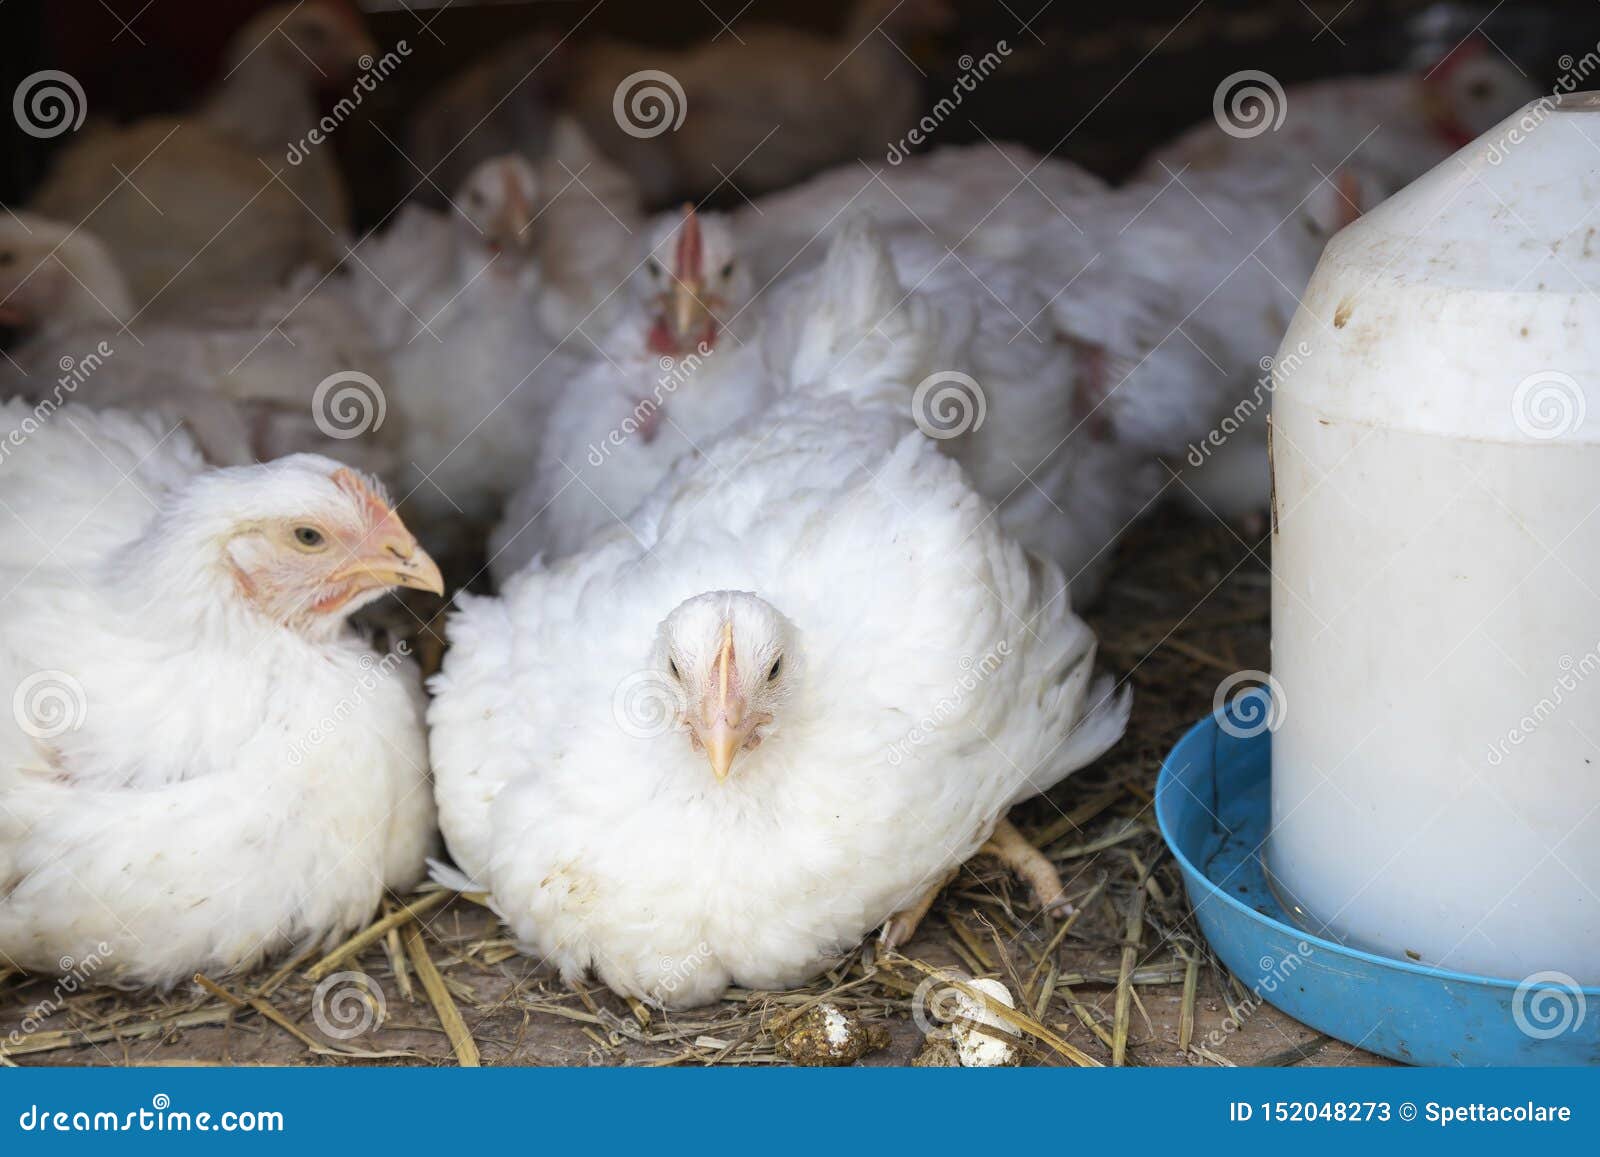 White Broiler Chickens in Cage at Poultry Farm Stock Image - Image of  agricultural, rooster: 152048273